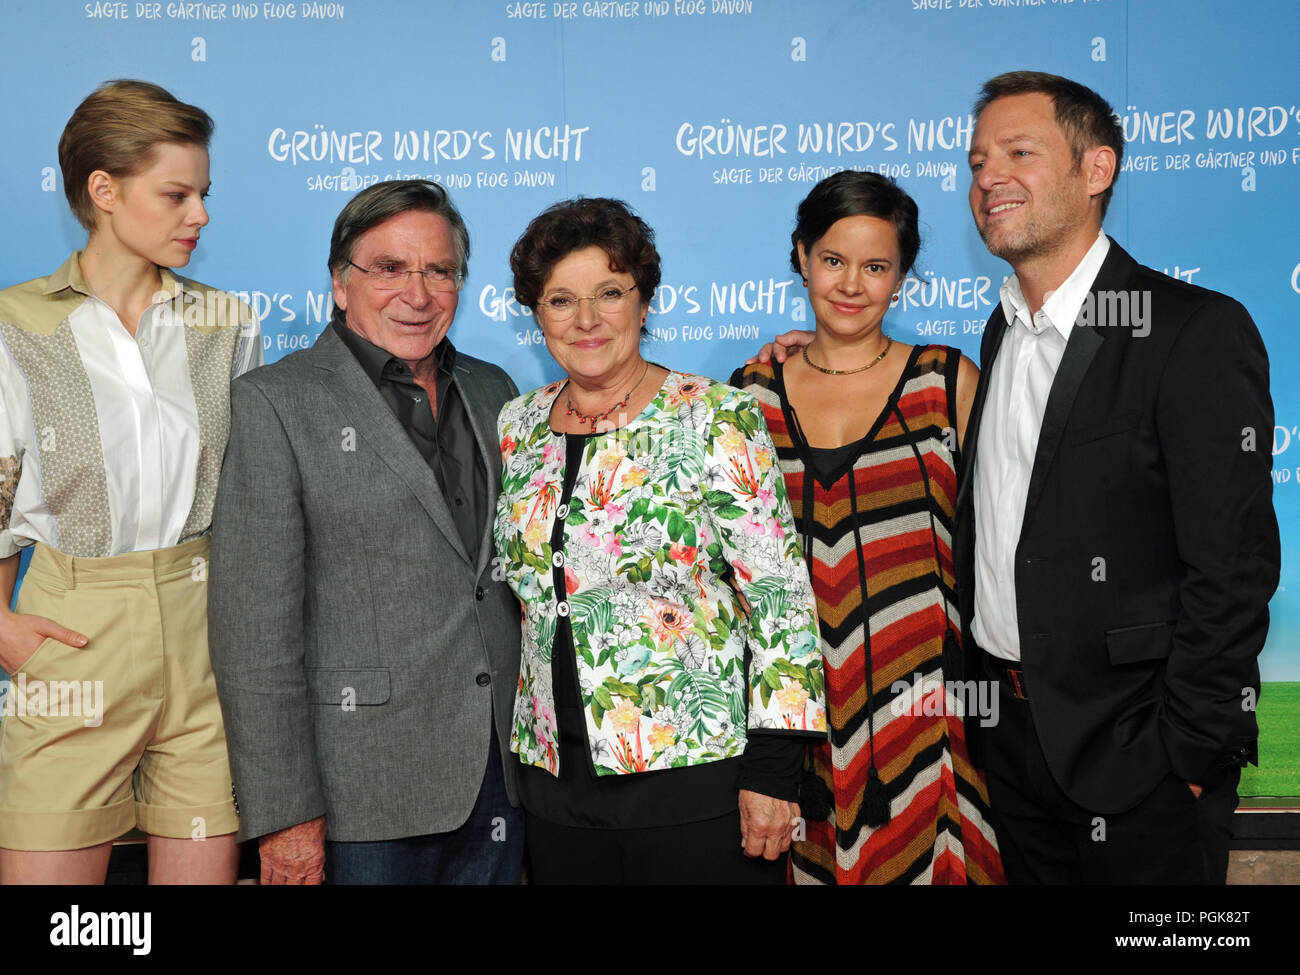 Munich, Germany. 27th Aug, 2018. The actors Emma Bading (l-r), Elmar Wepper, Monika Baumgartner, Karolina Horsten and the director Florian Gallenberger come to the premiere of their film 'Grüner wird's nicht, said the gardener and flew away'. The comedy will be released on August 30, 2018. Credit: Ursula Düren/dpa/Alamy Live News Stock Photo